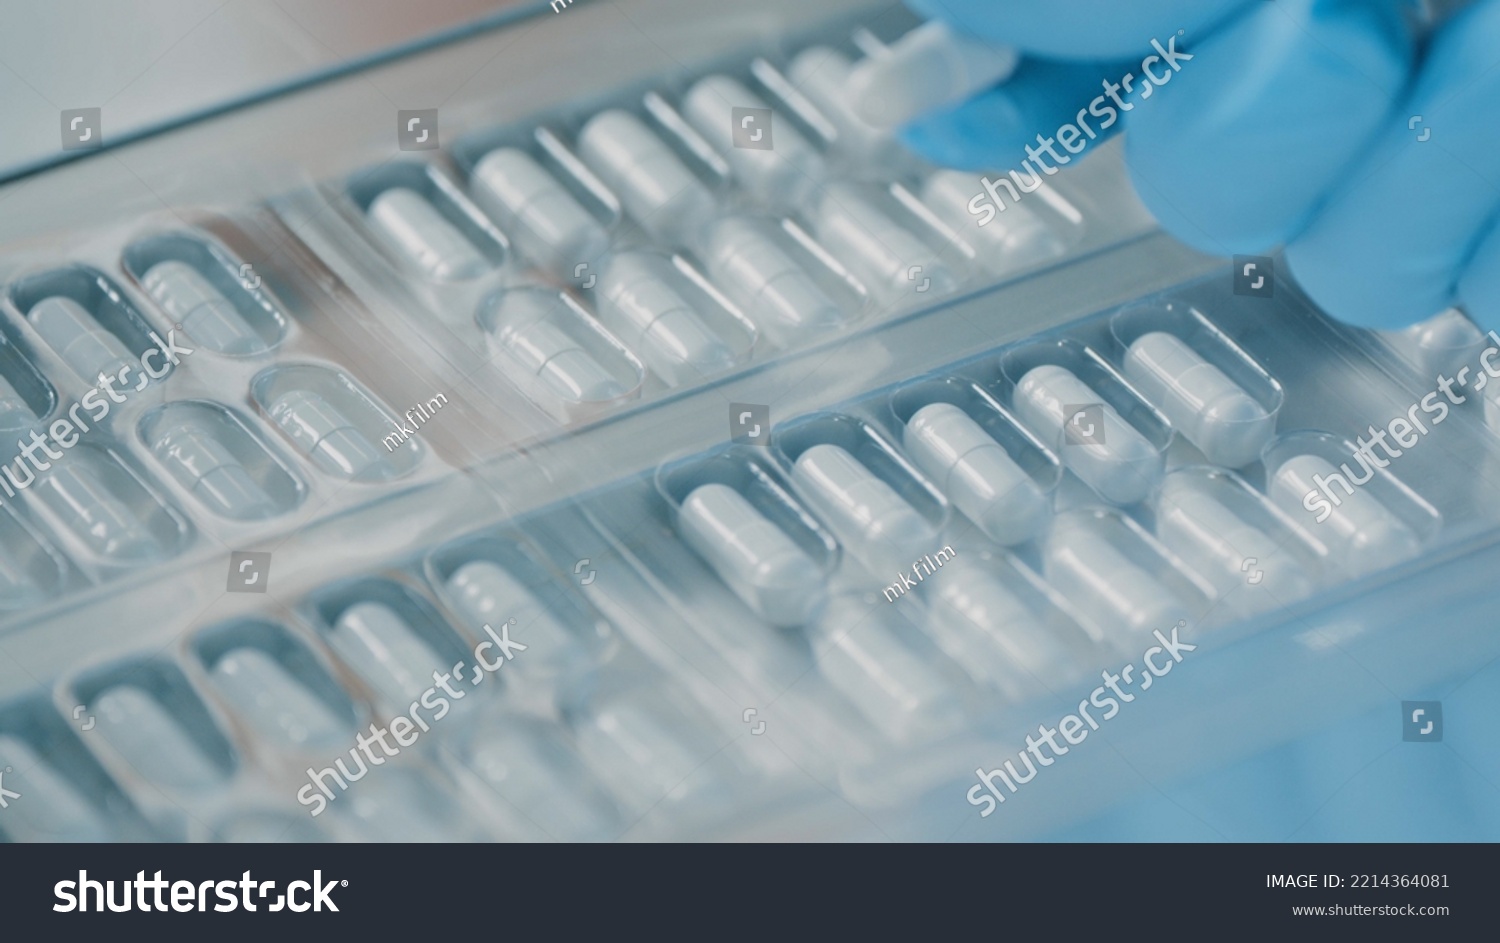 Pharmacologist checks blister packs with medicinal capsules moving on a conveyor. Plastic package with capsule meds. Medication capsules in blisters. Pharmaceutical factory production line. Macro #2214364081